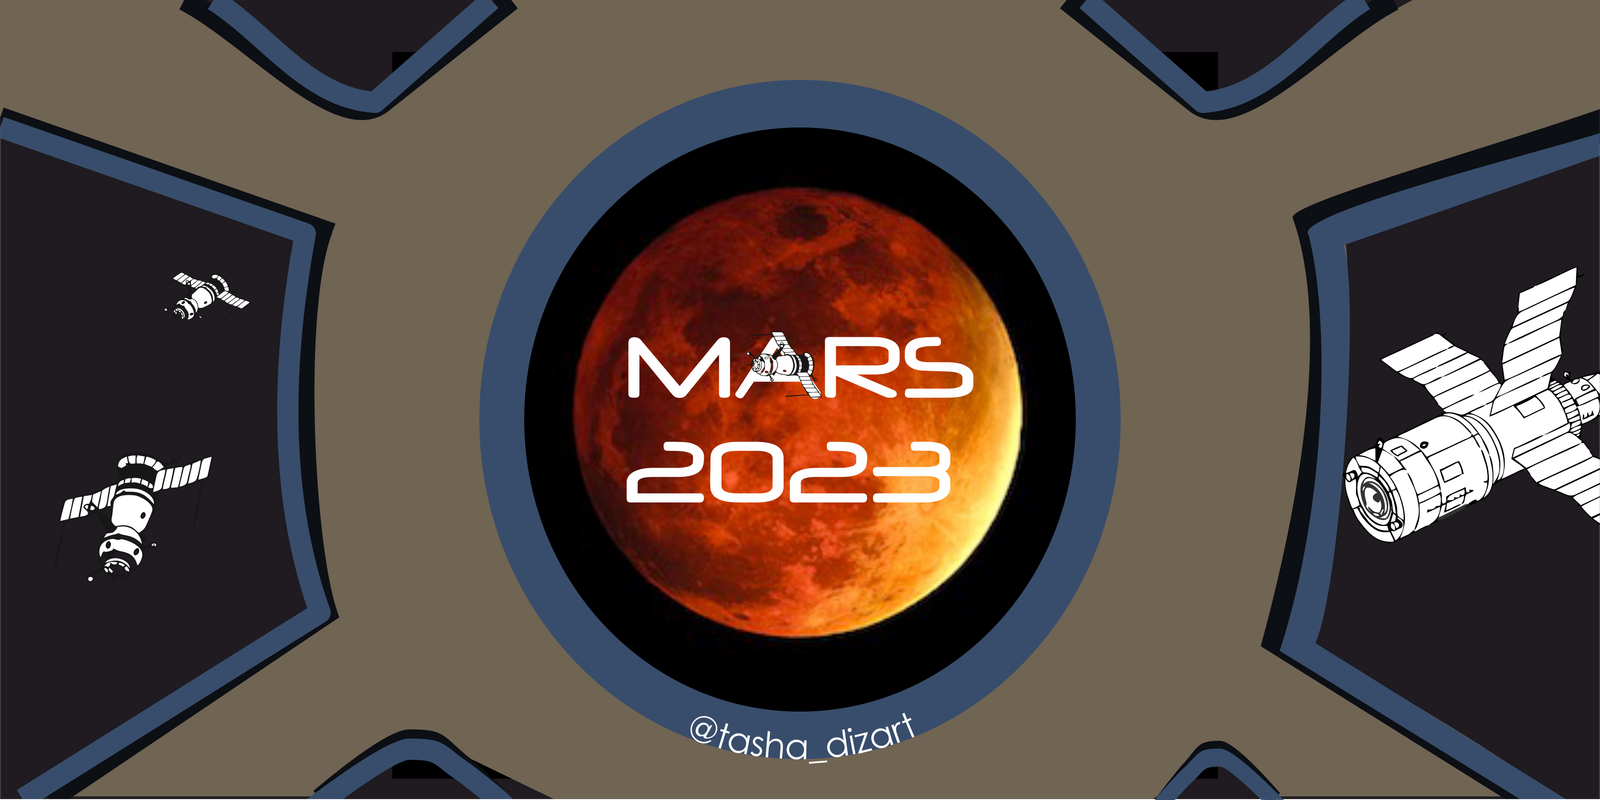 Who will fly to Mars in 2023? - My, Mars, Space, 2023, Satellite, Expedition to mars, Porthole, Illustrations, Computer graphics, Satellites